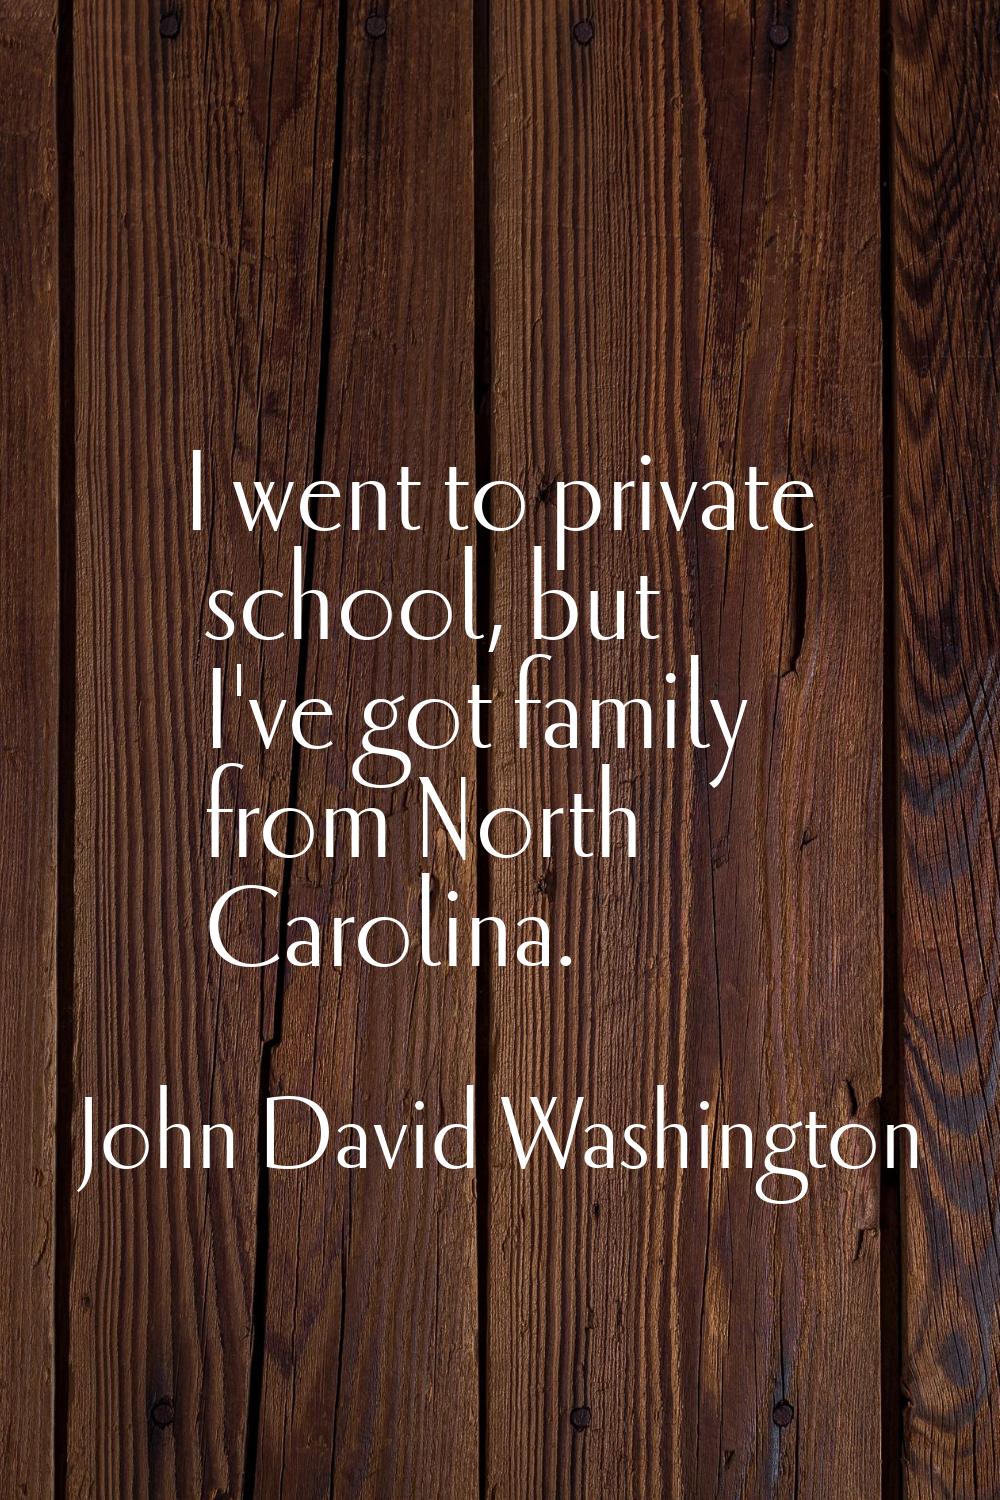 I went to private school, but I've got family from North Carolina.